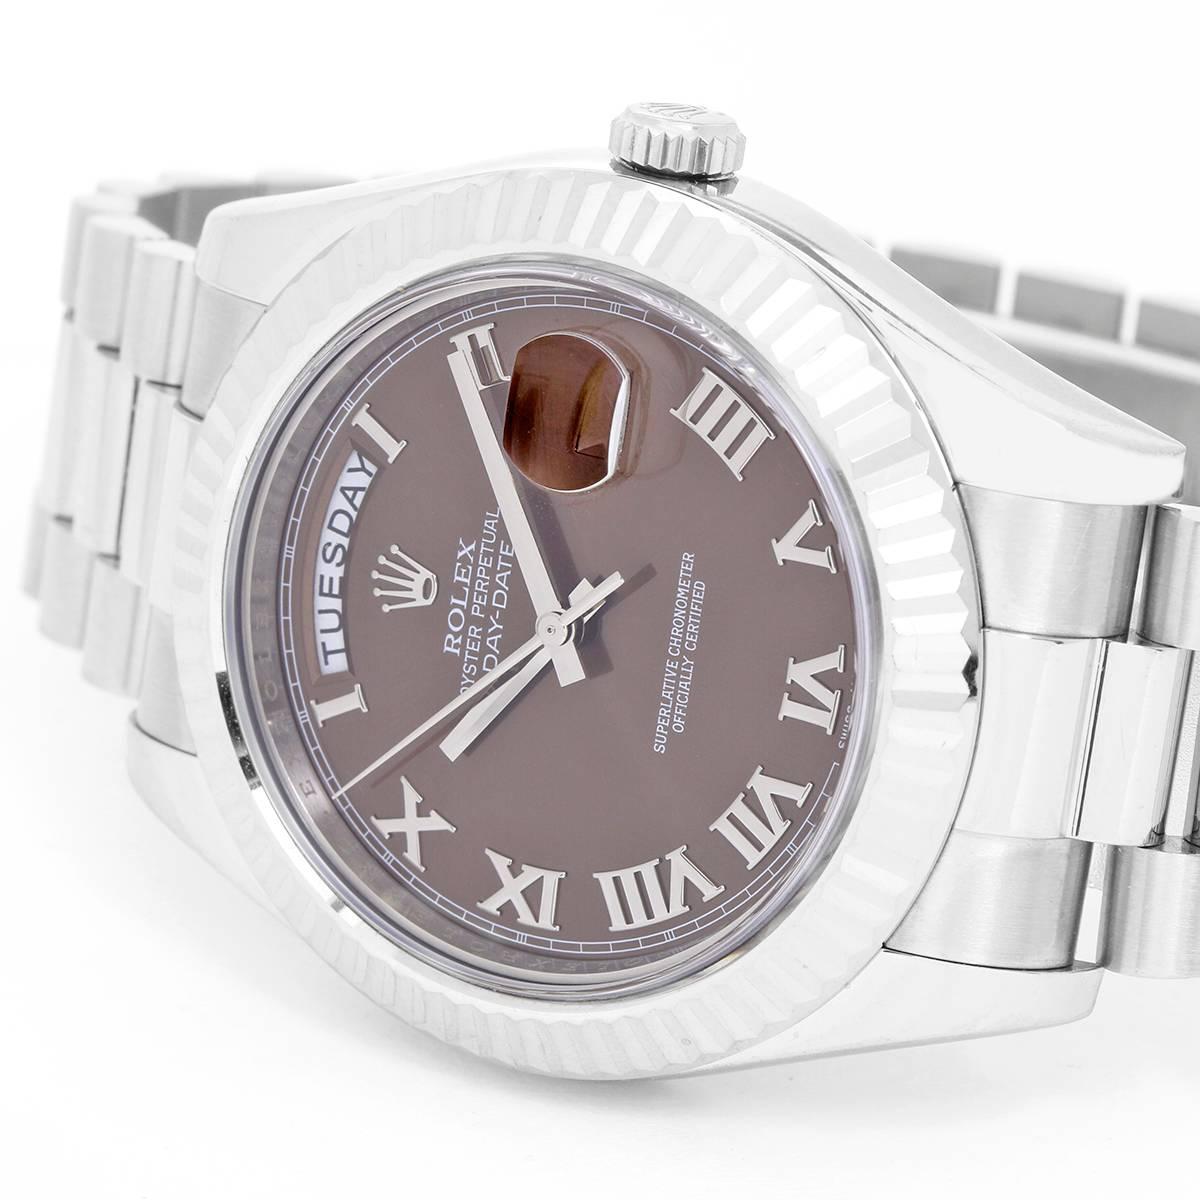 Rolex President Day-Date II Men's 18k White Gold Watch 218239 -  Automatic winding, 31 jewels, Quickset, sapphire crystal. 18k white gold case with fluted bezel (41mm diameter). Havana 